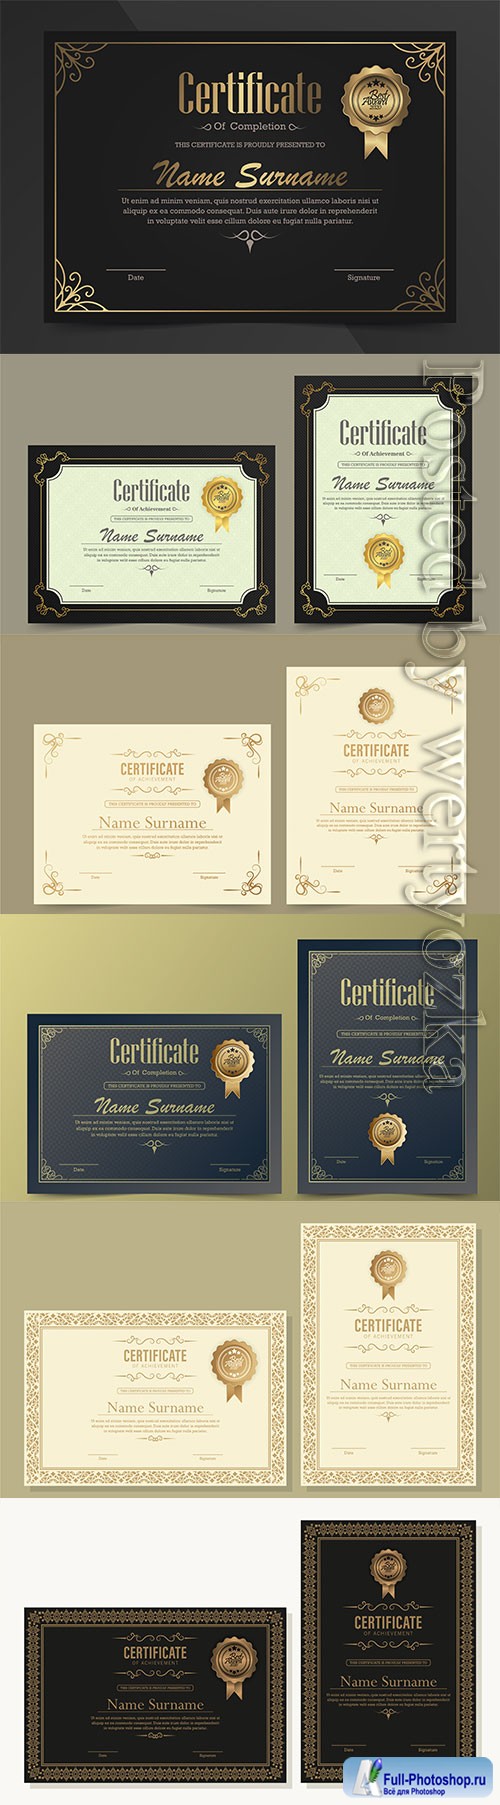 Achievement vector certificate template in vintage style